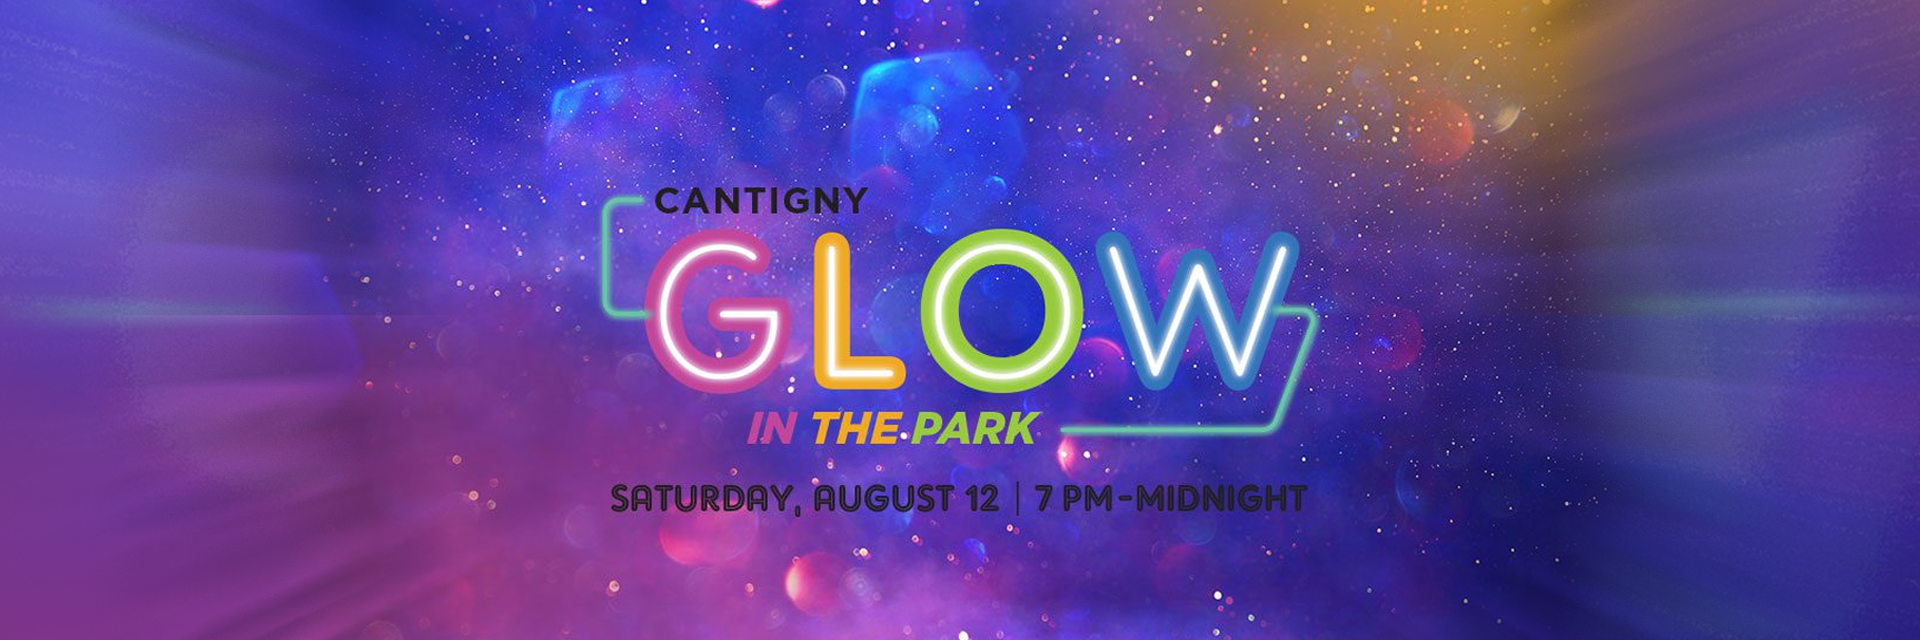 Glow in the Park-Cantigny